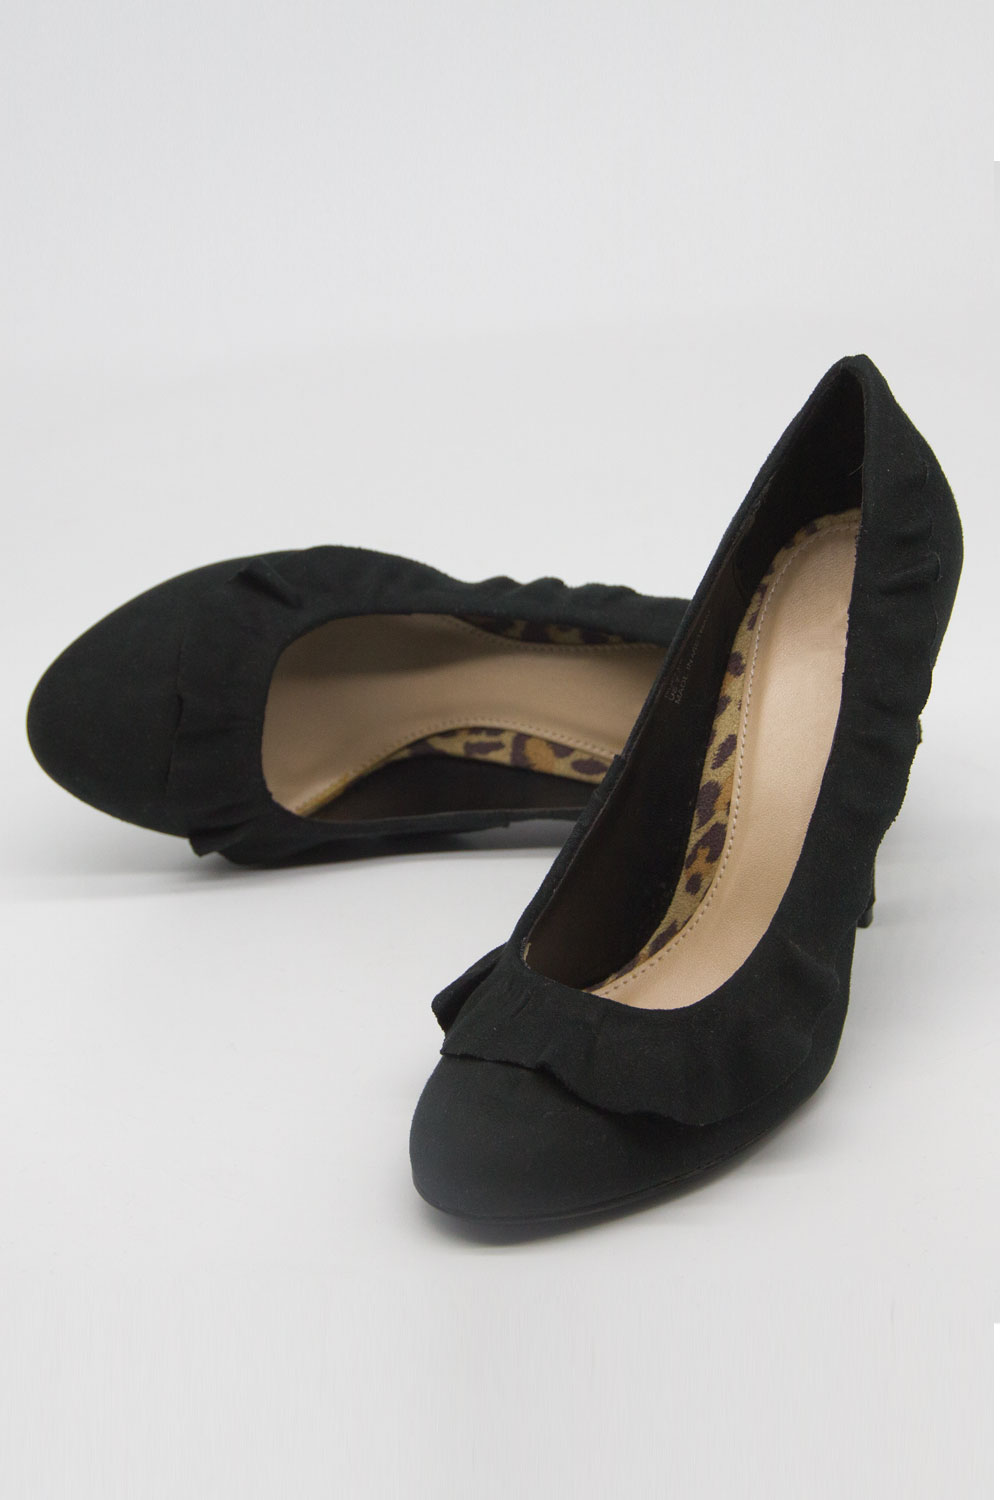 Frill Detailed Heeled Shoes (Black)